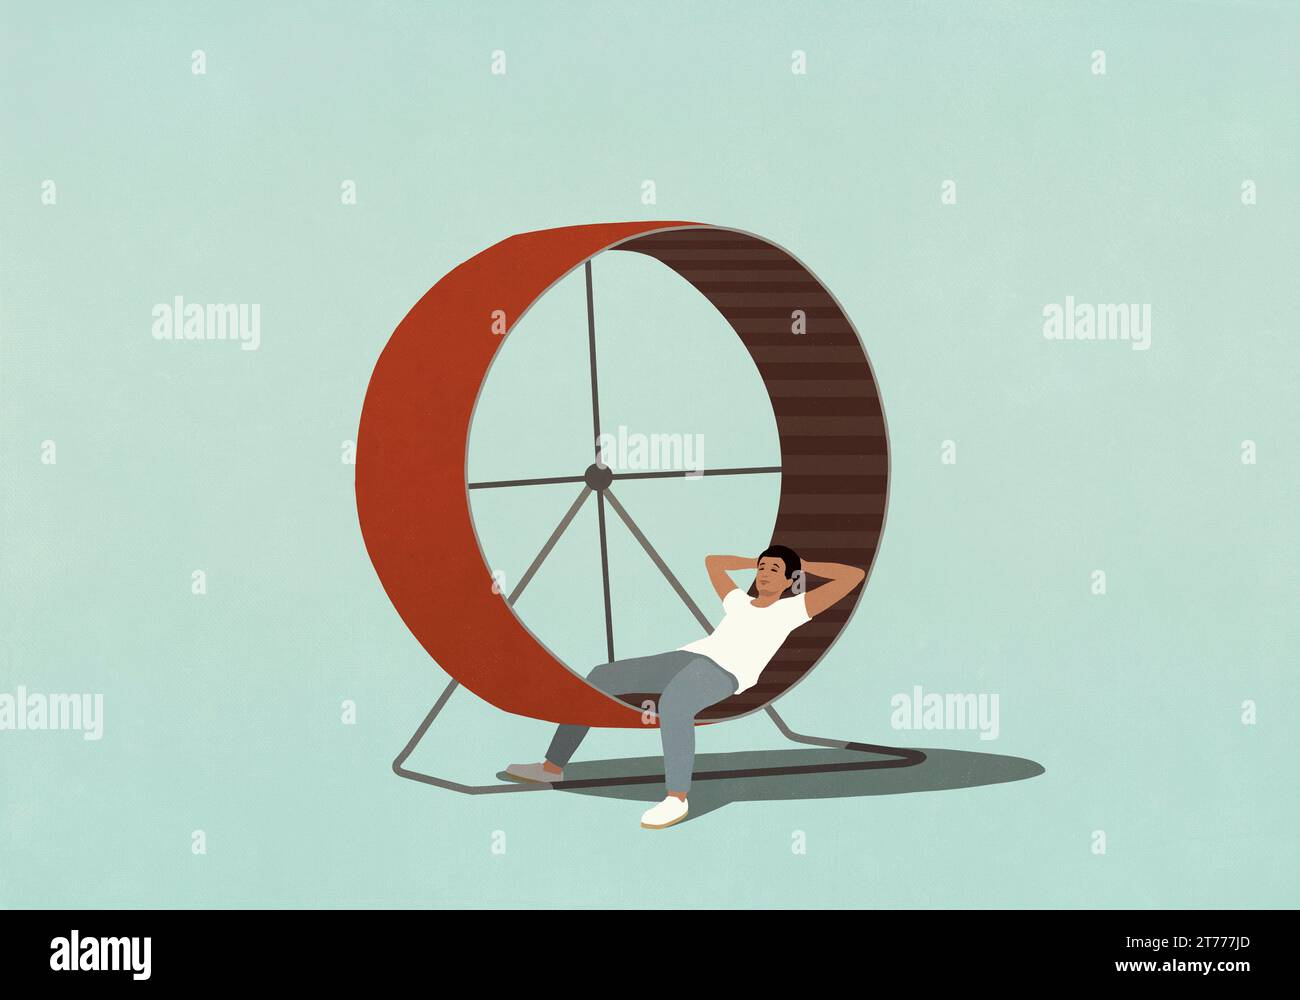 Man relaxing with hands behind head on hamster wheel Stock Photo